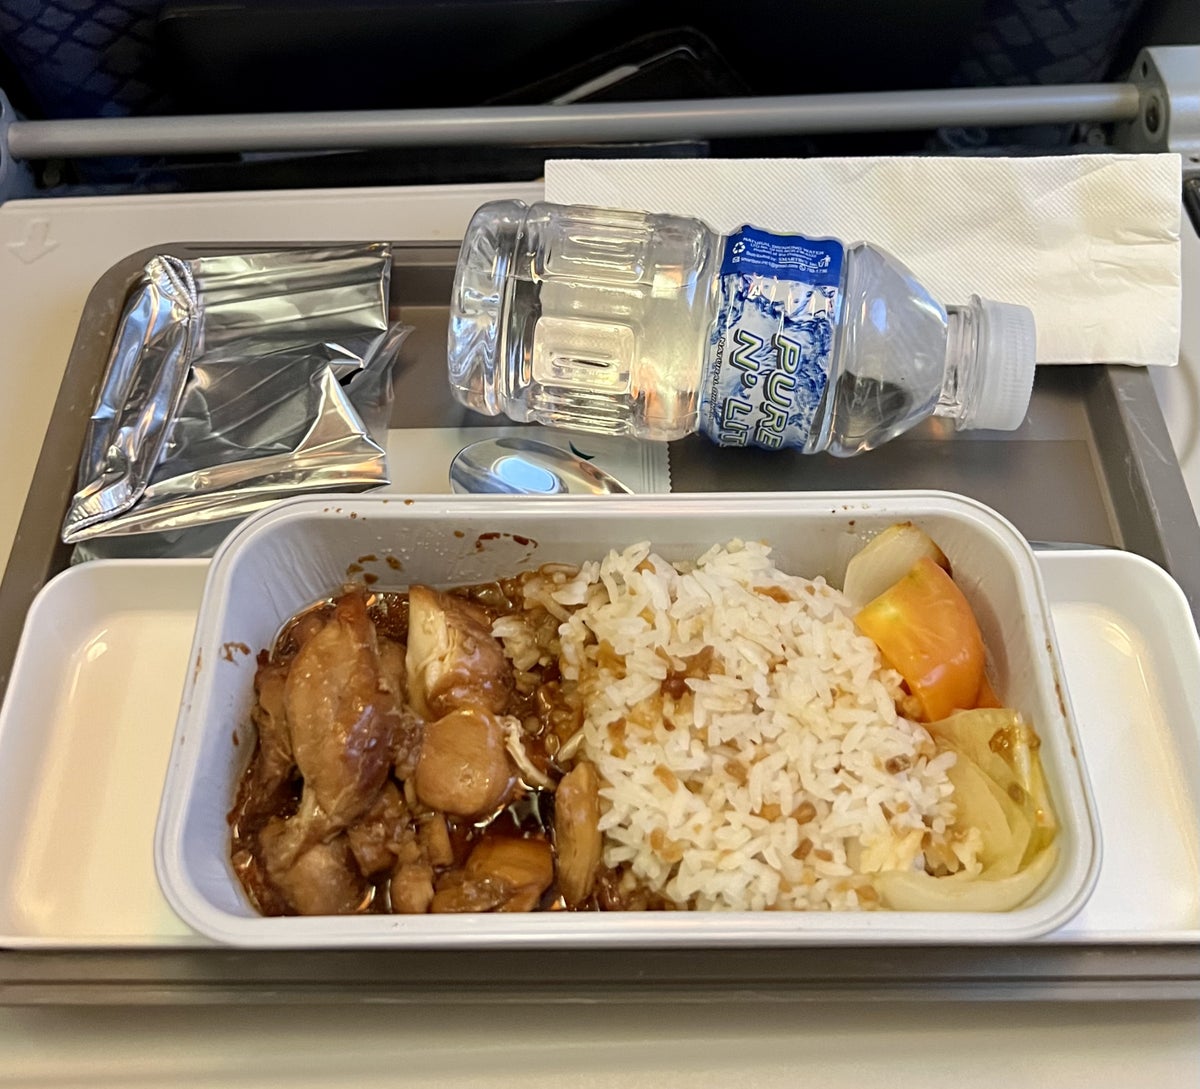 Cathay Pacific short haul economy meal